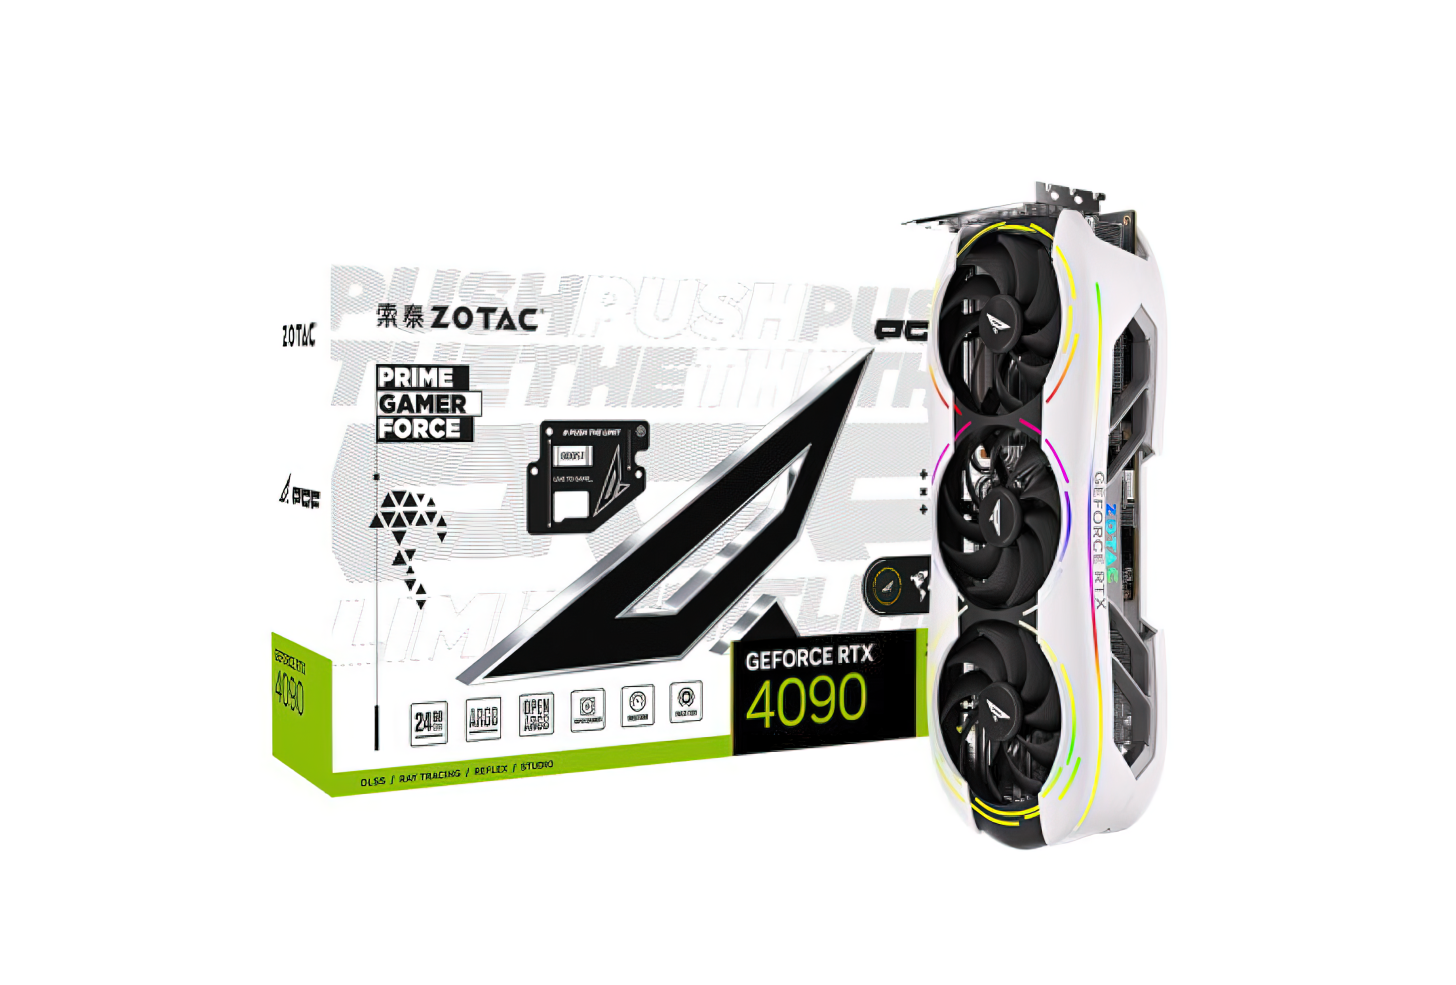 ZOTAC-GeForce-RTX-4090-PGF-Graphics-Card-_10-g-low_res-scale-2_00x-1456x985.png